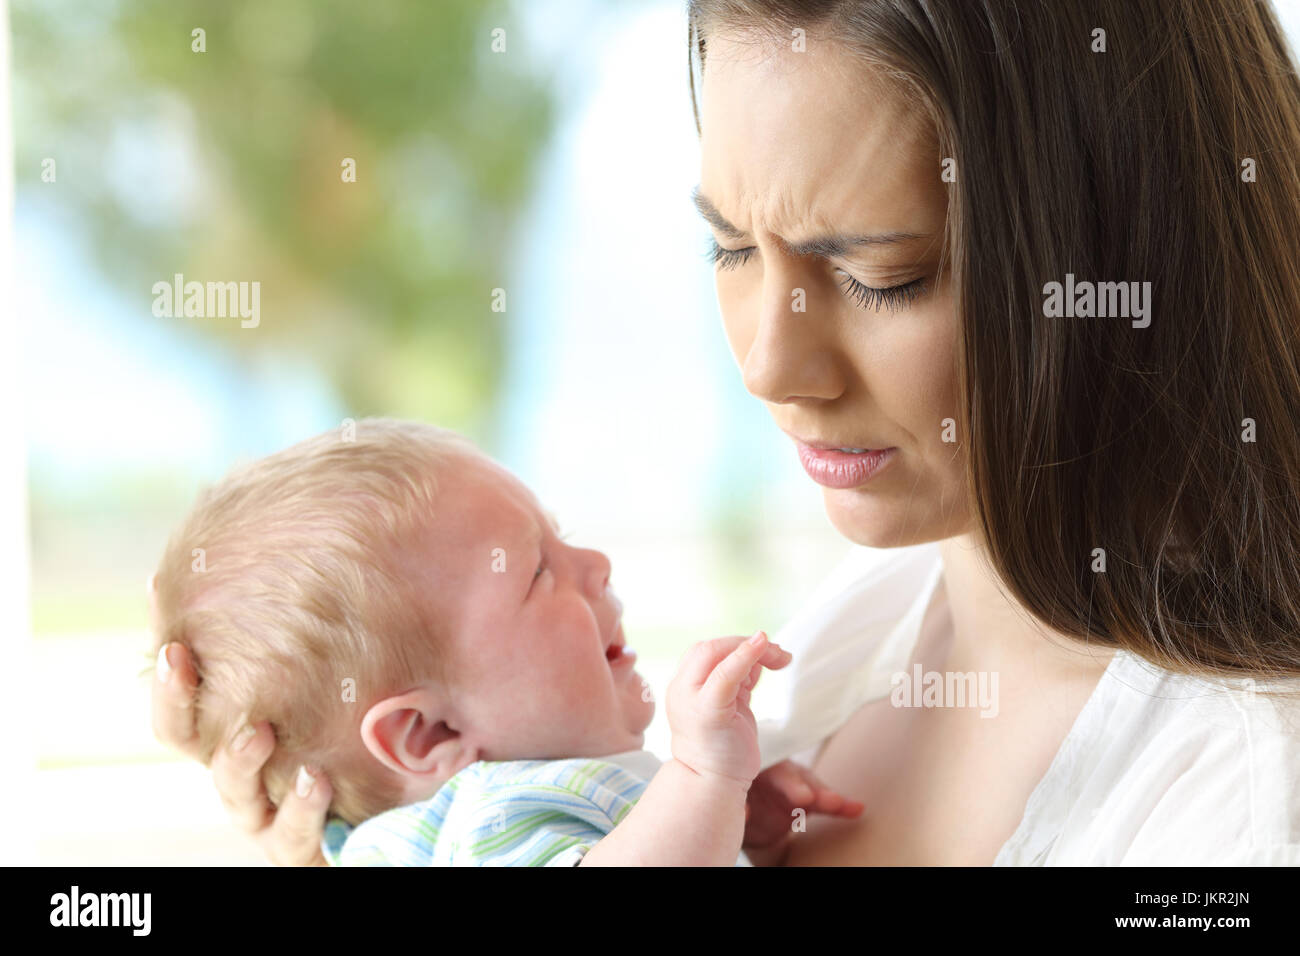 Tired desperate mother holding her baby crying Stock Photo